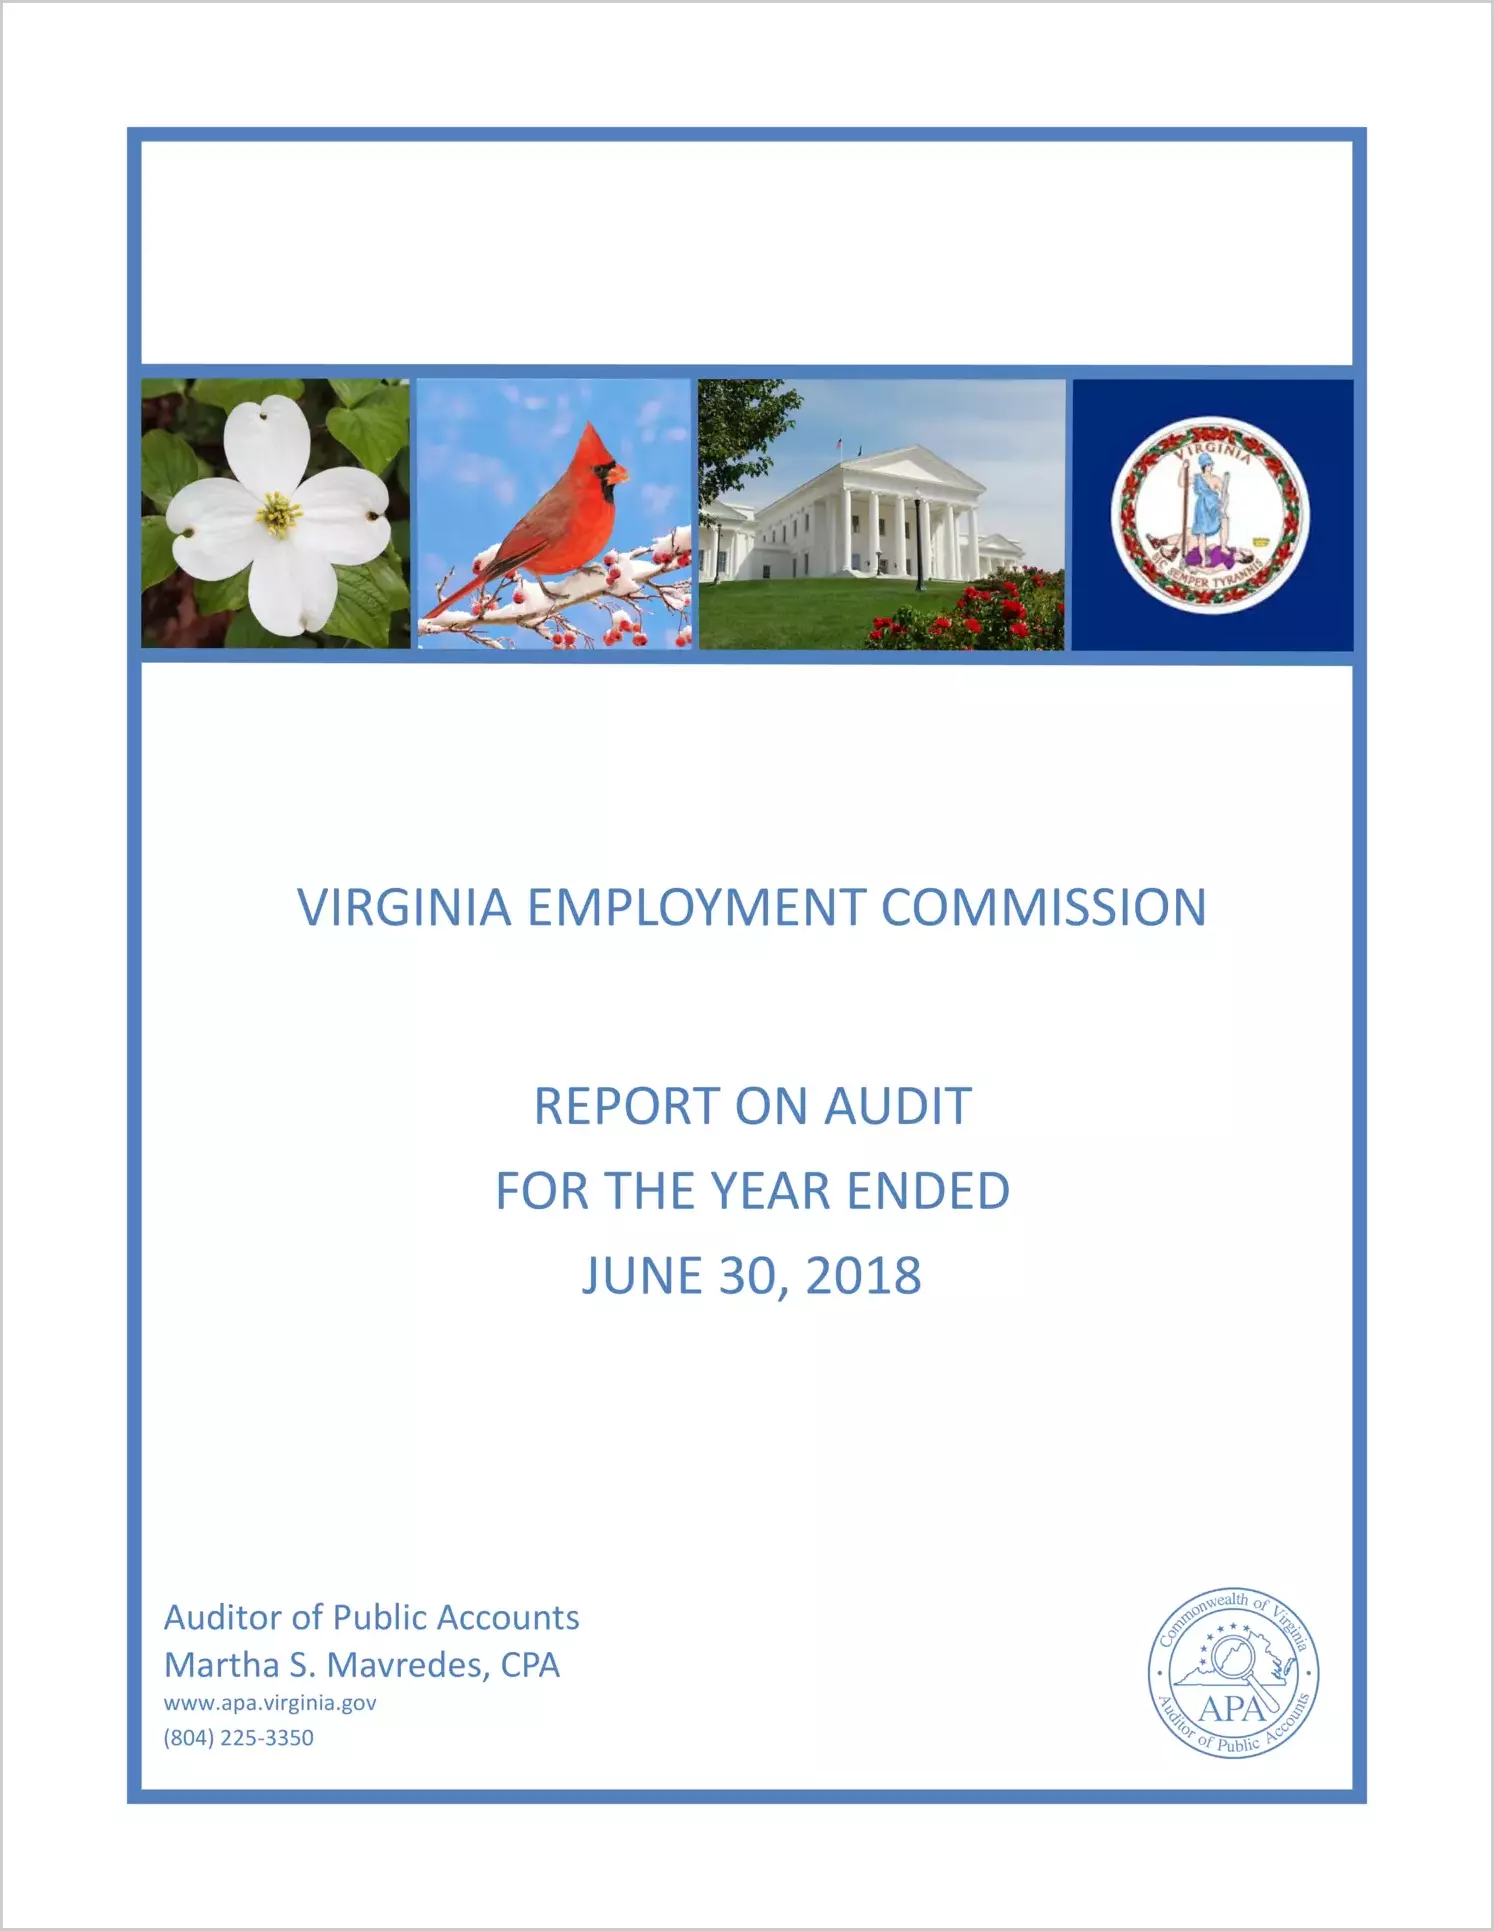 Virginia Employment Commission for the year ended June 30, 2018